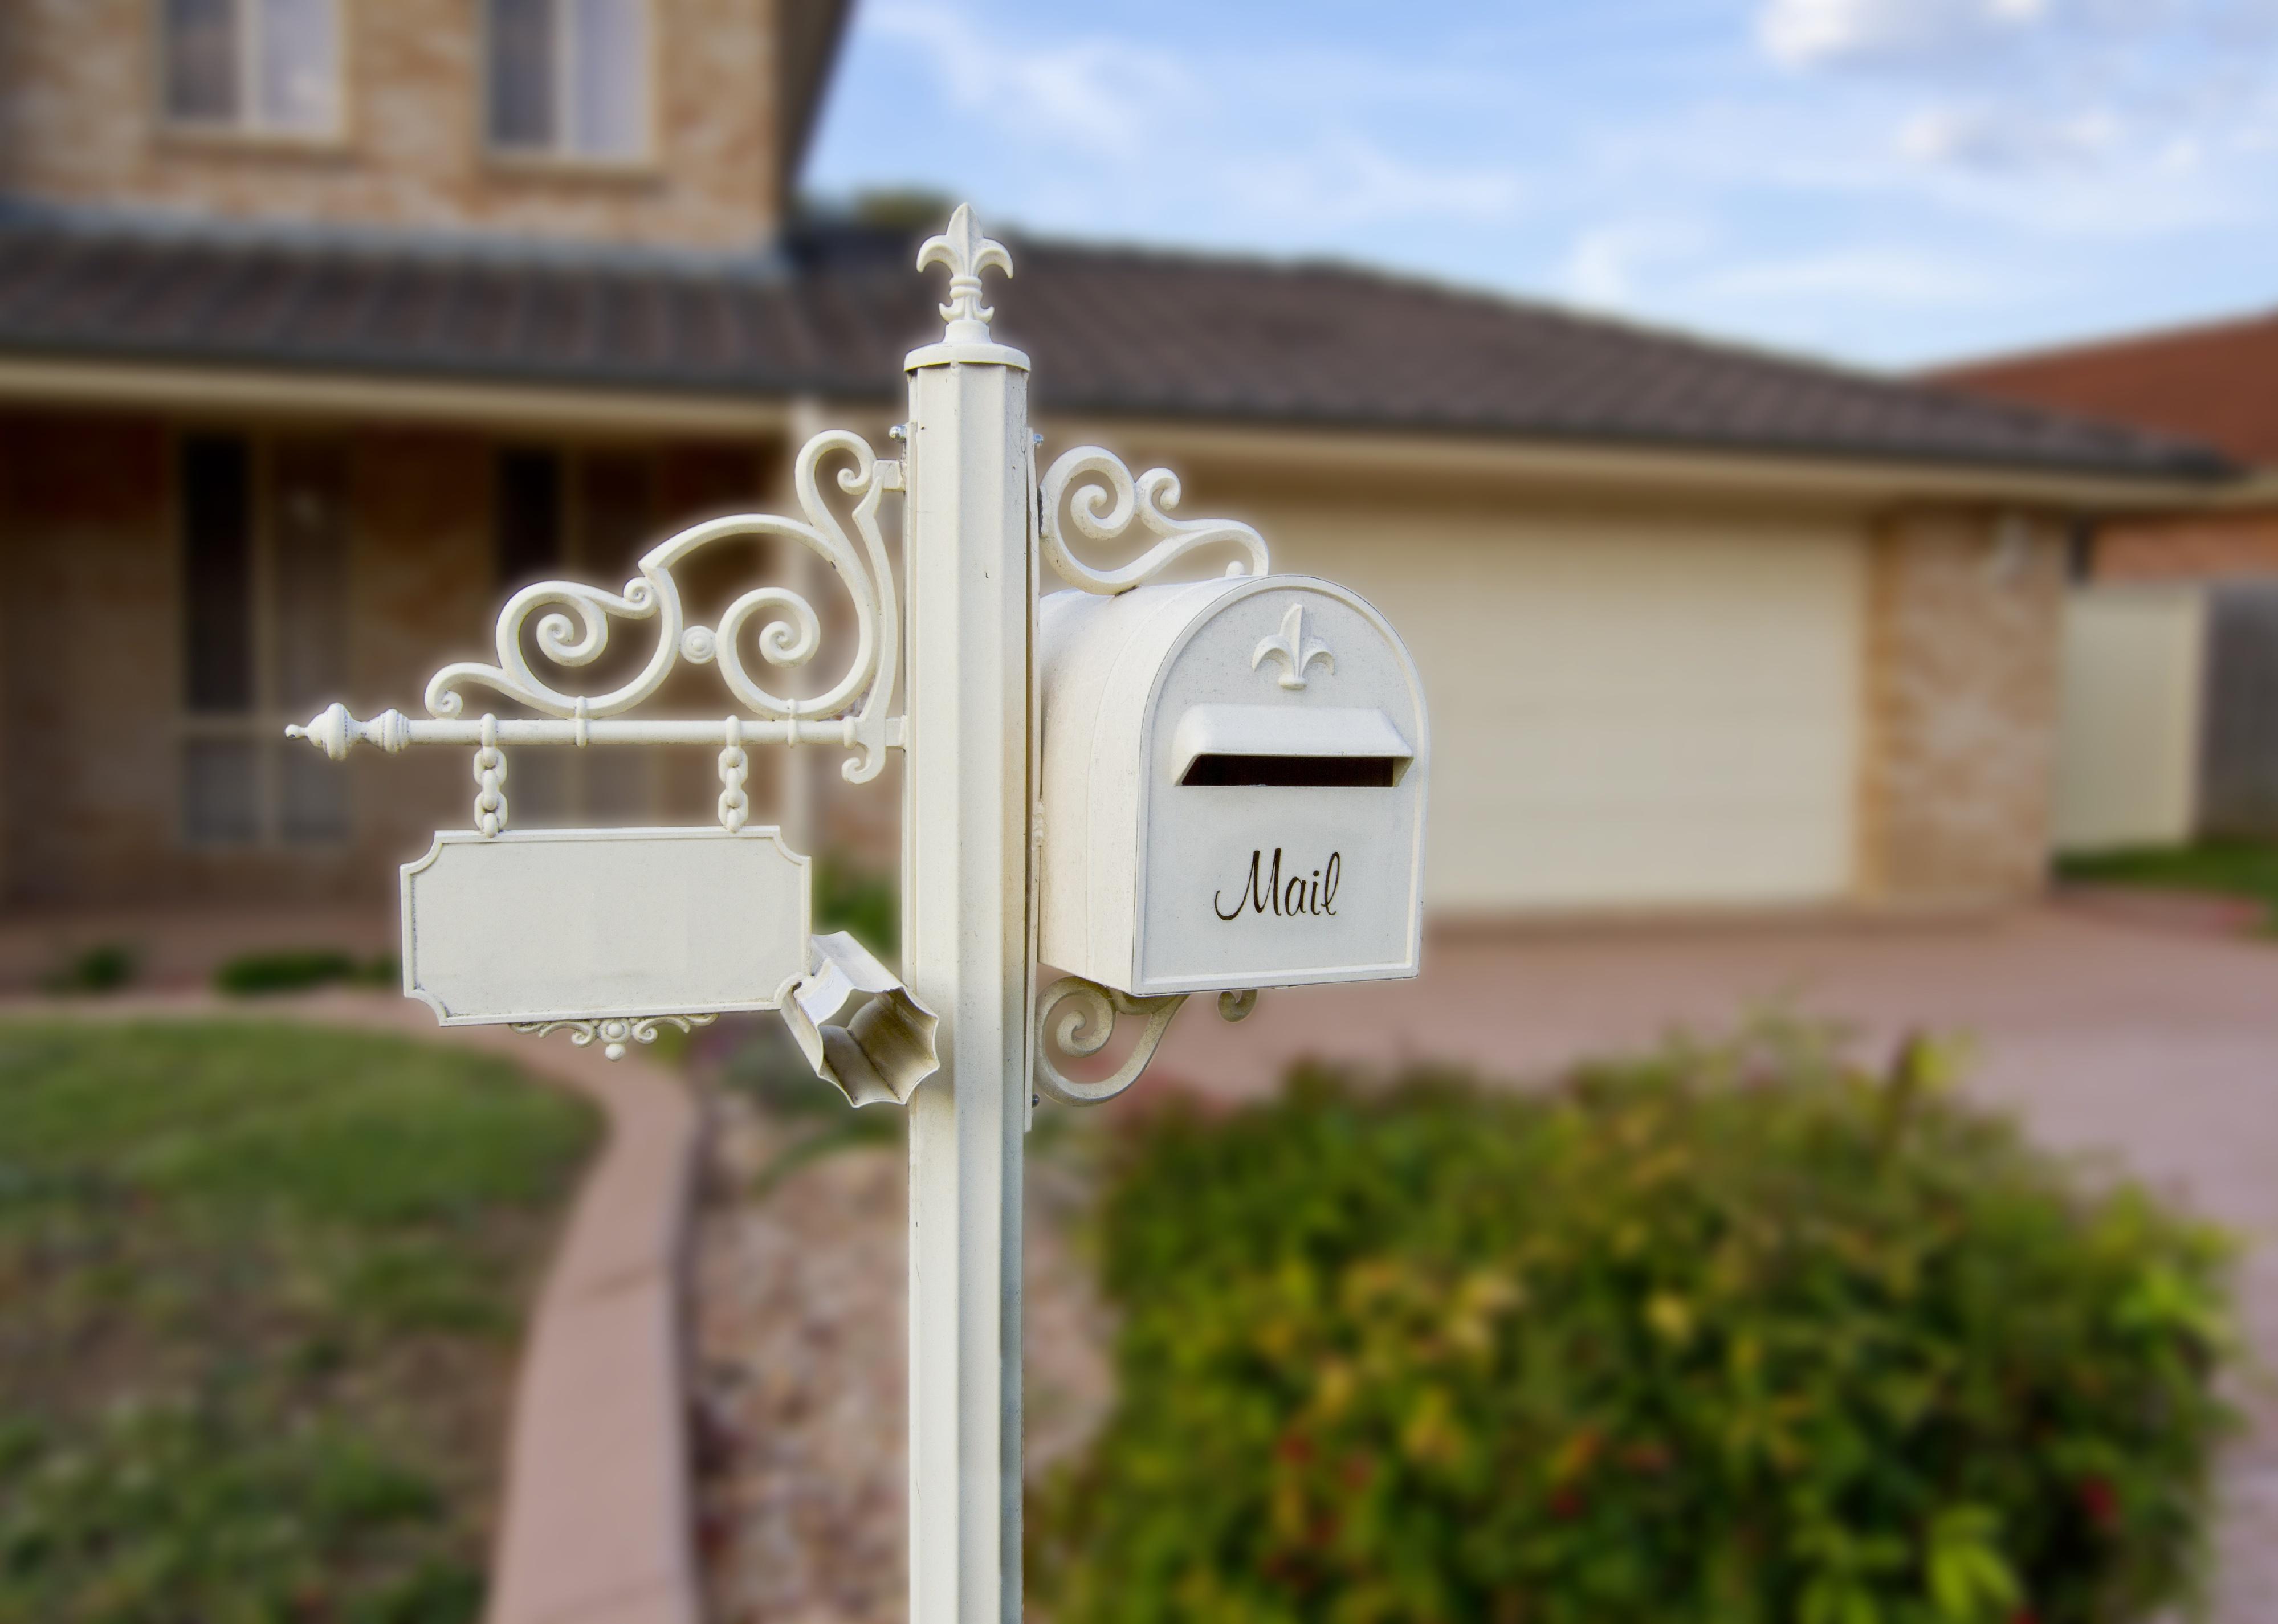 A white ornate mailbox in front of a home.